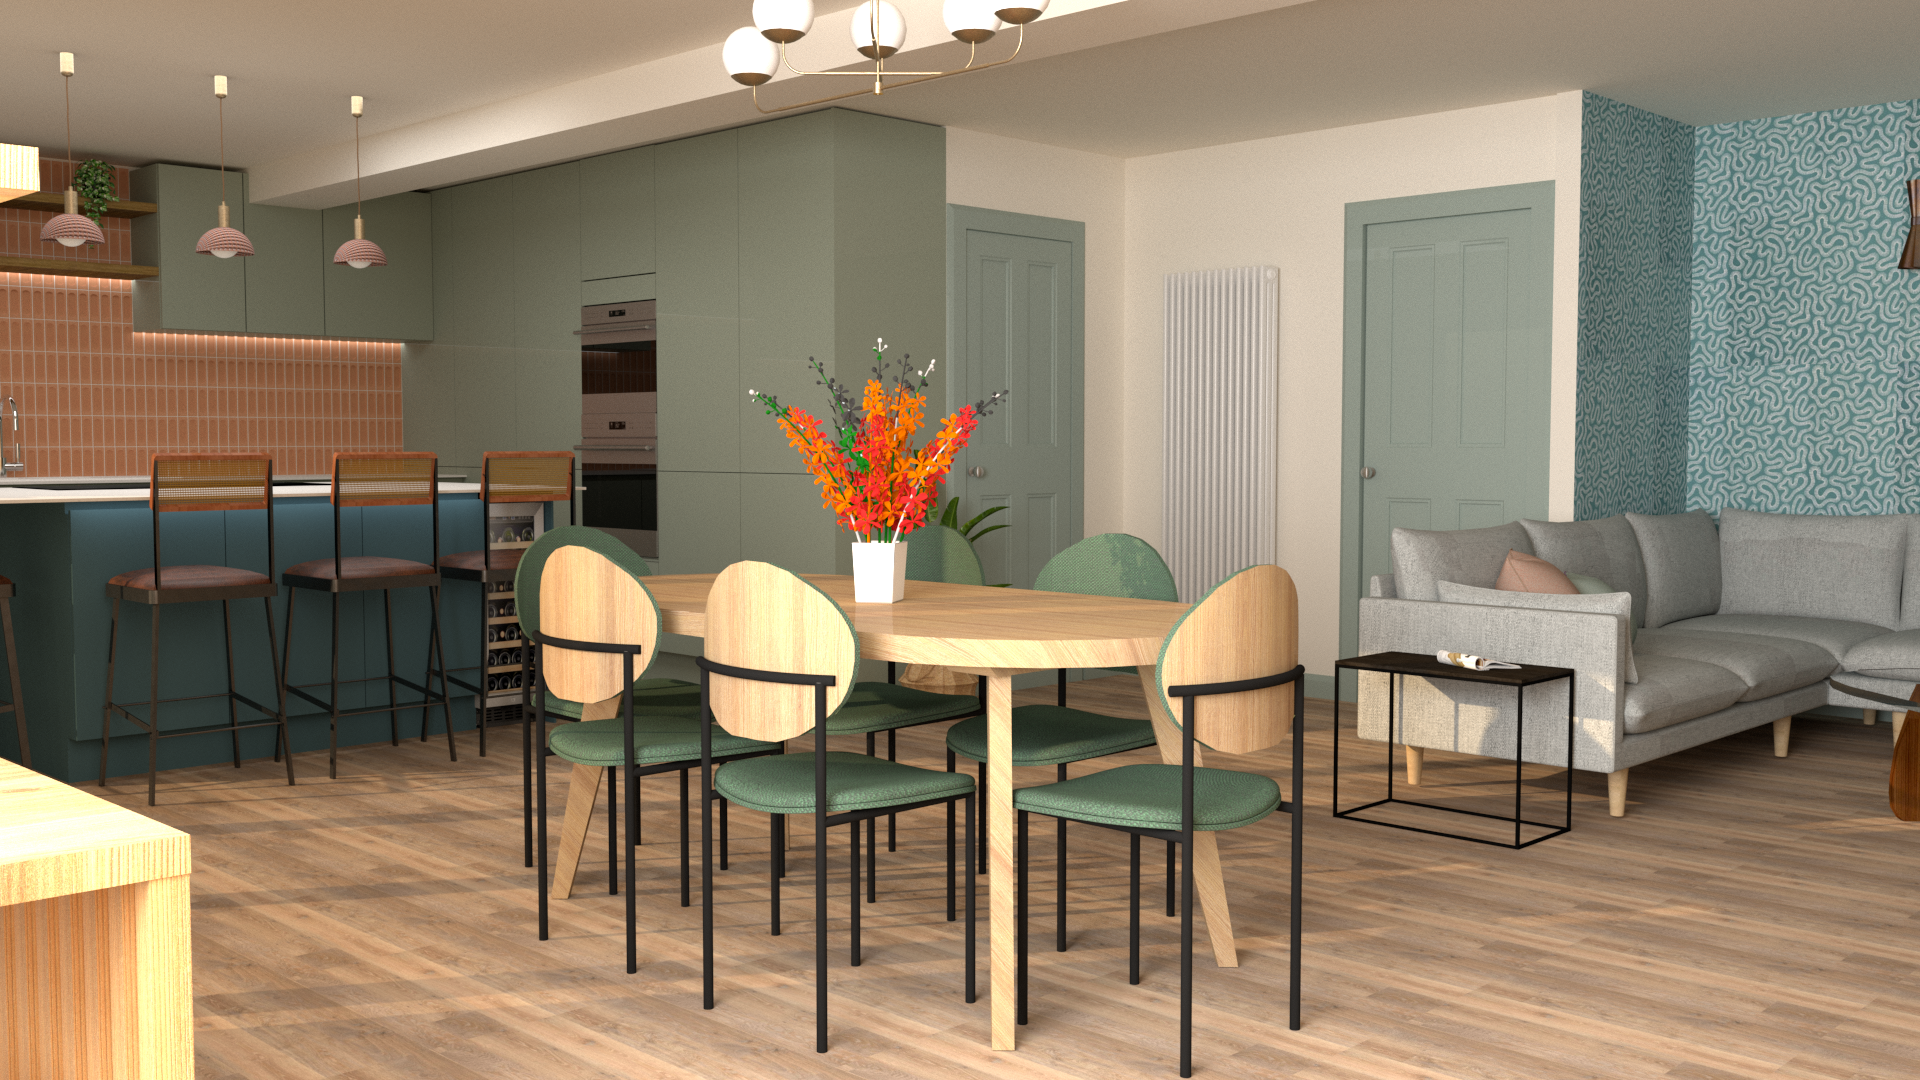 A rendered image showing a kitchen, dinning table and sofa